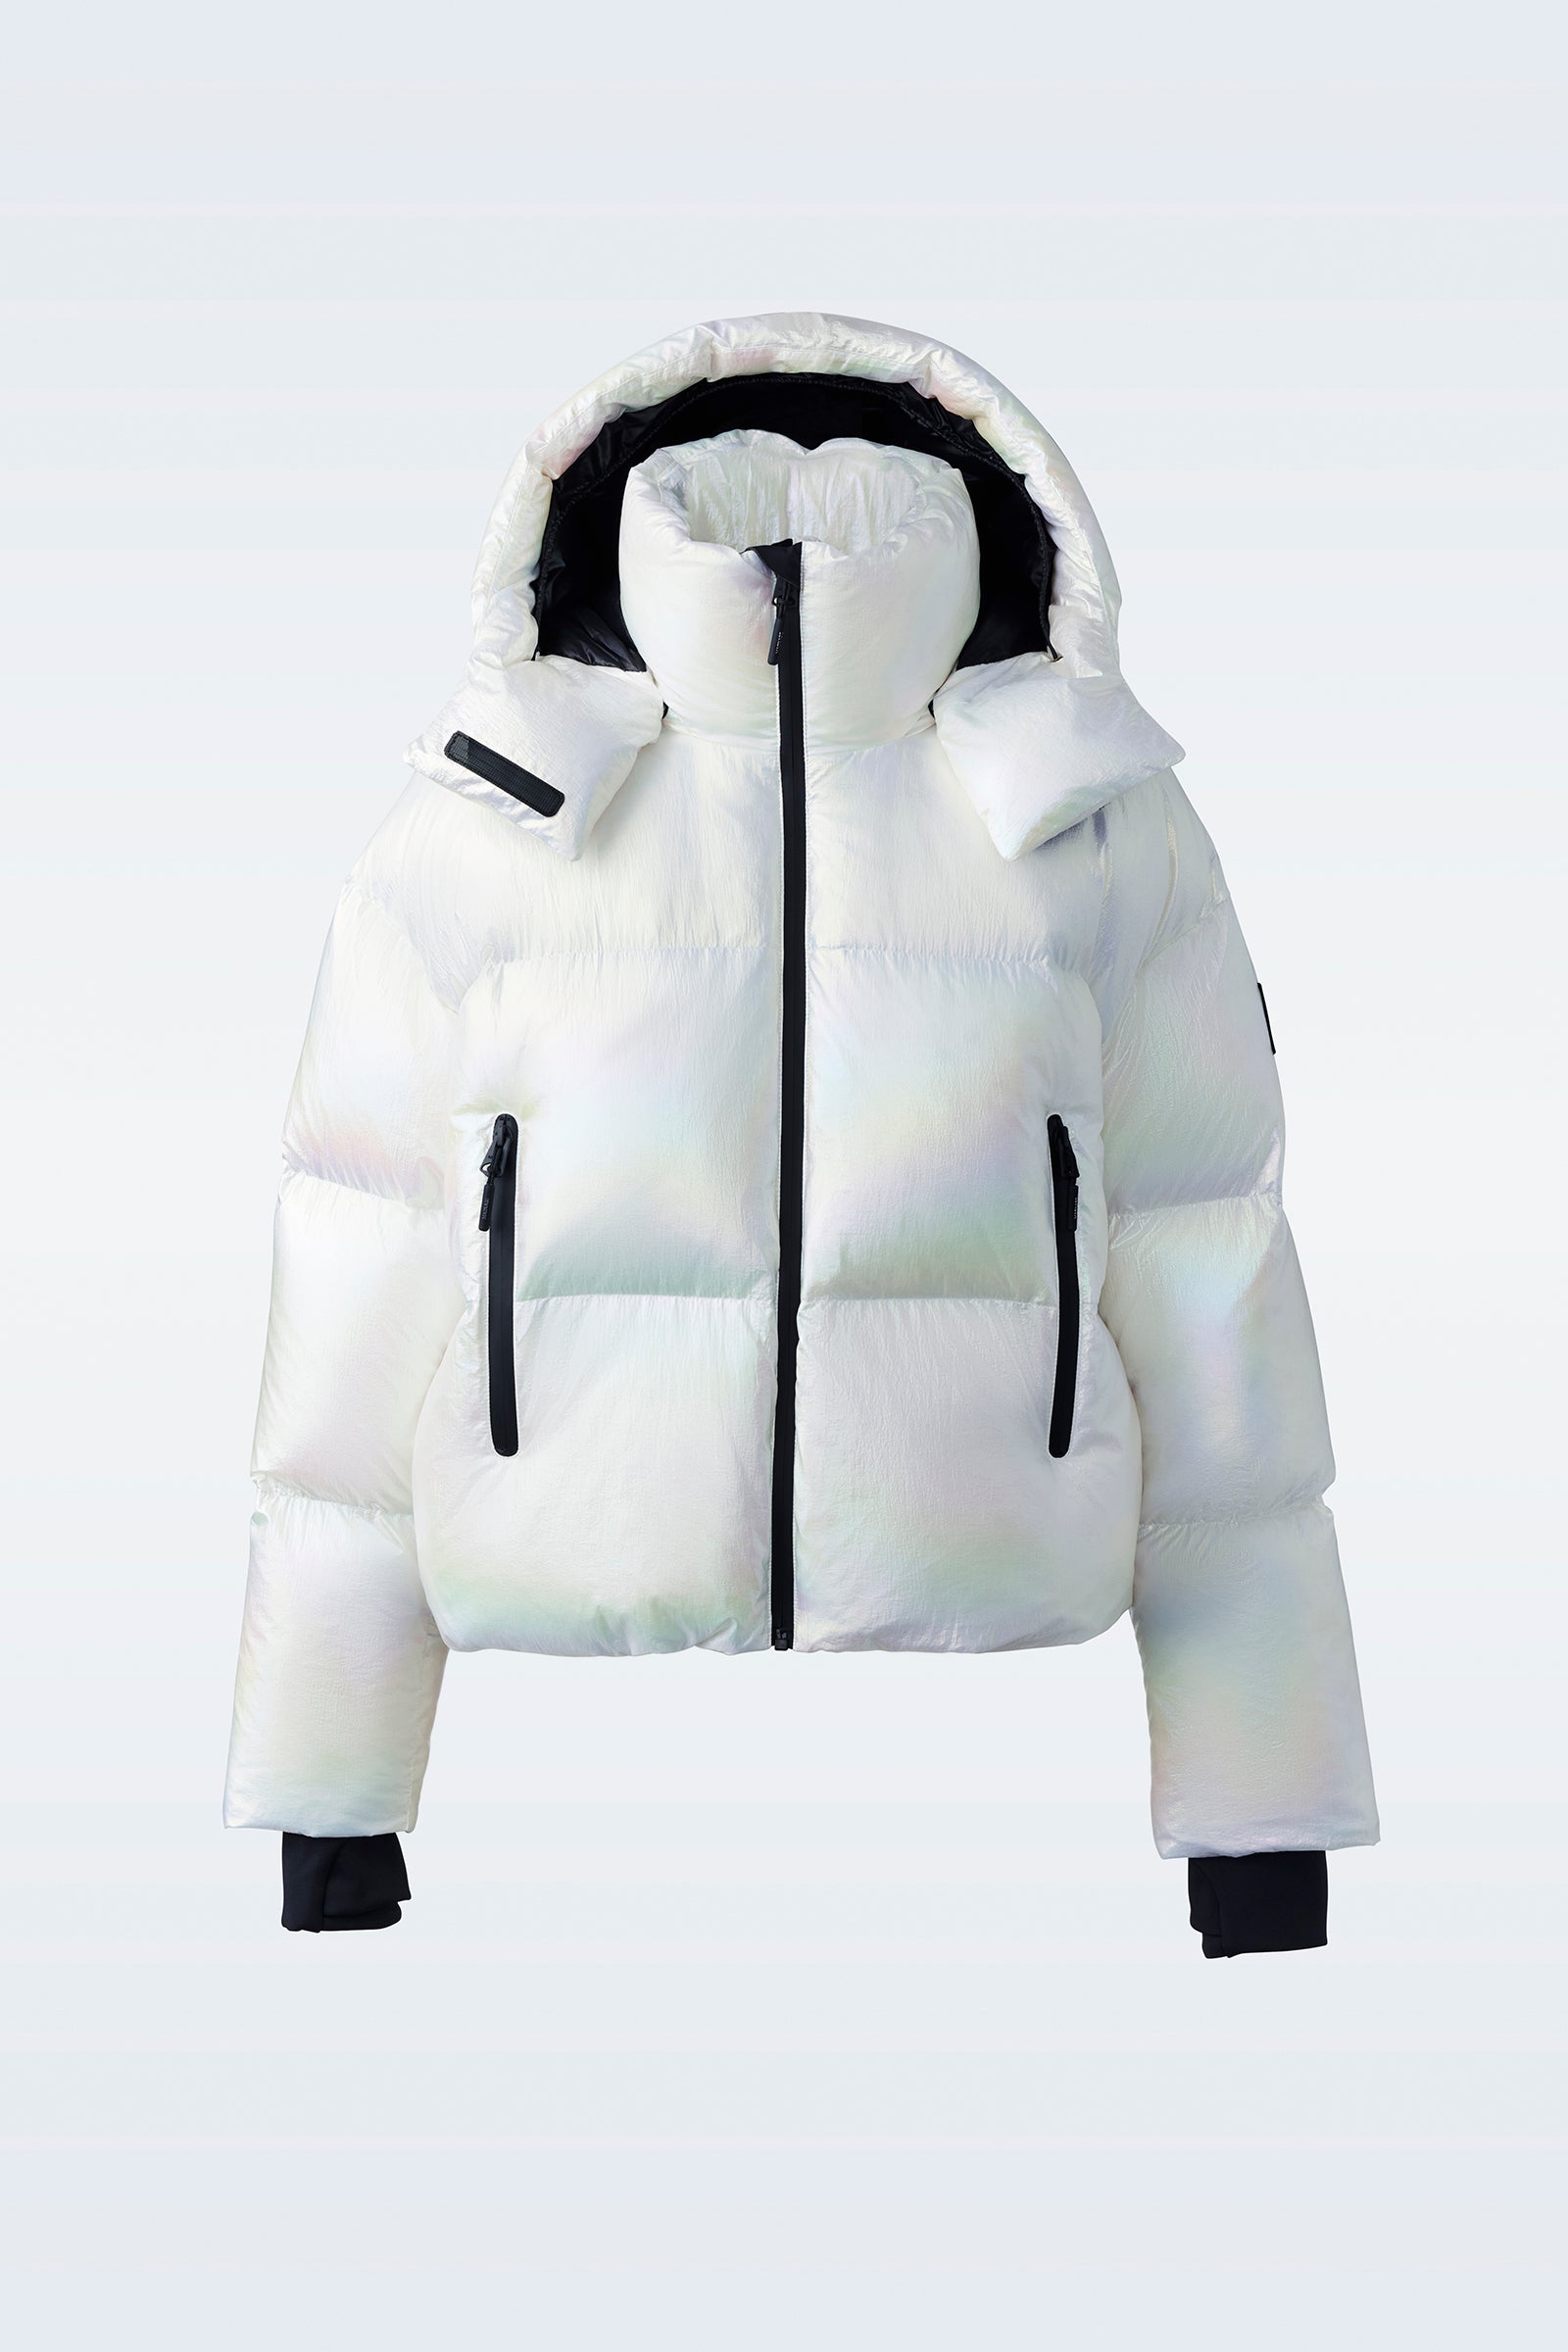 Women's Puffer, Quilted & Down Jackets